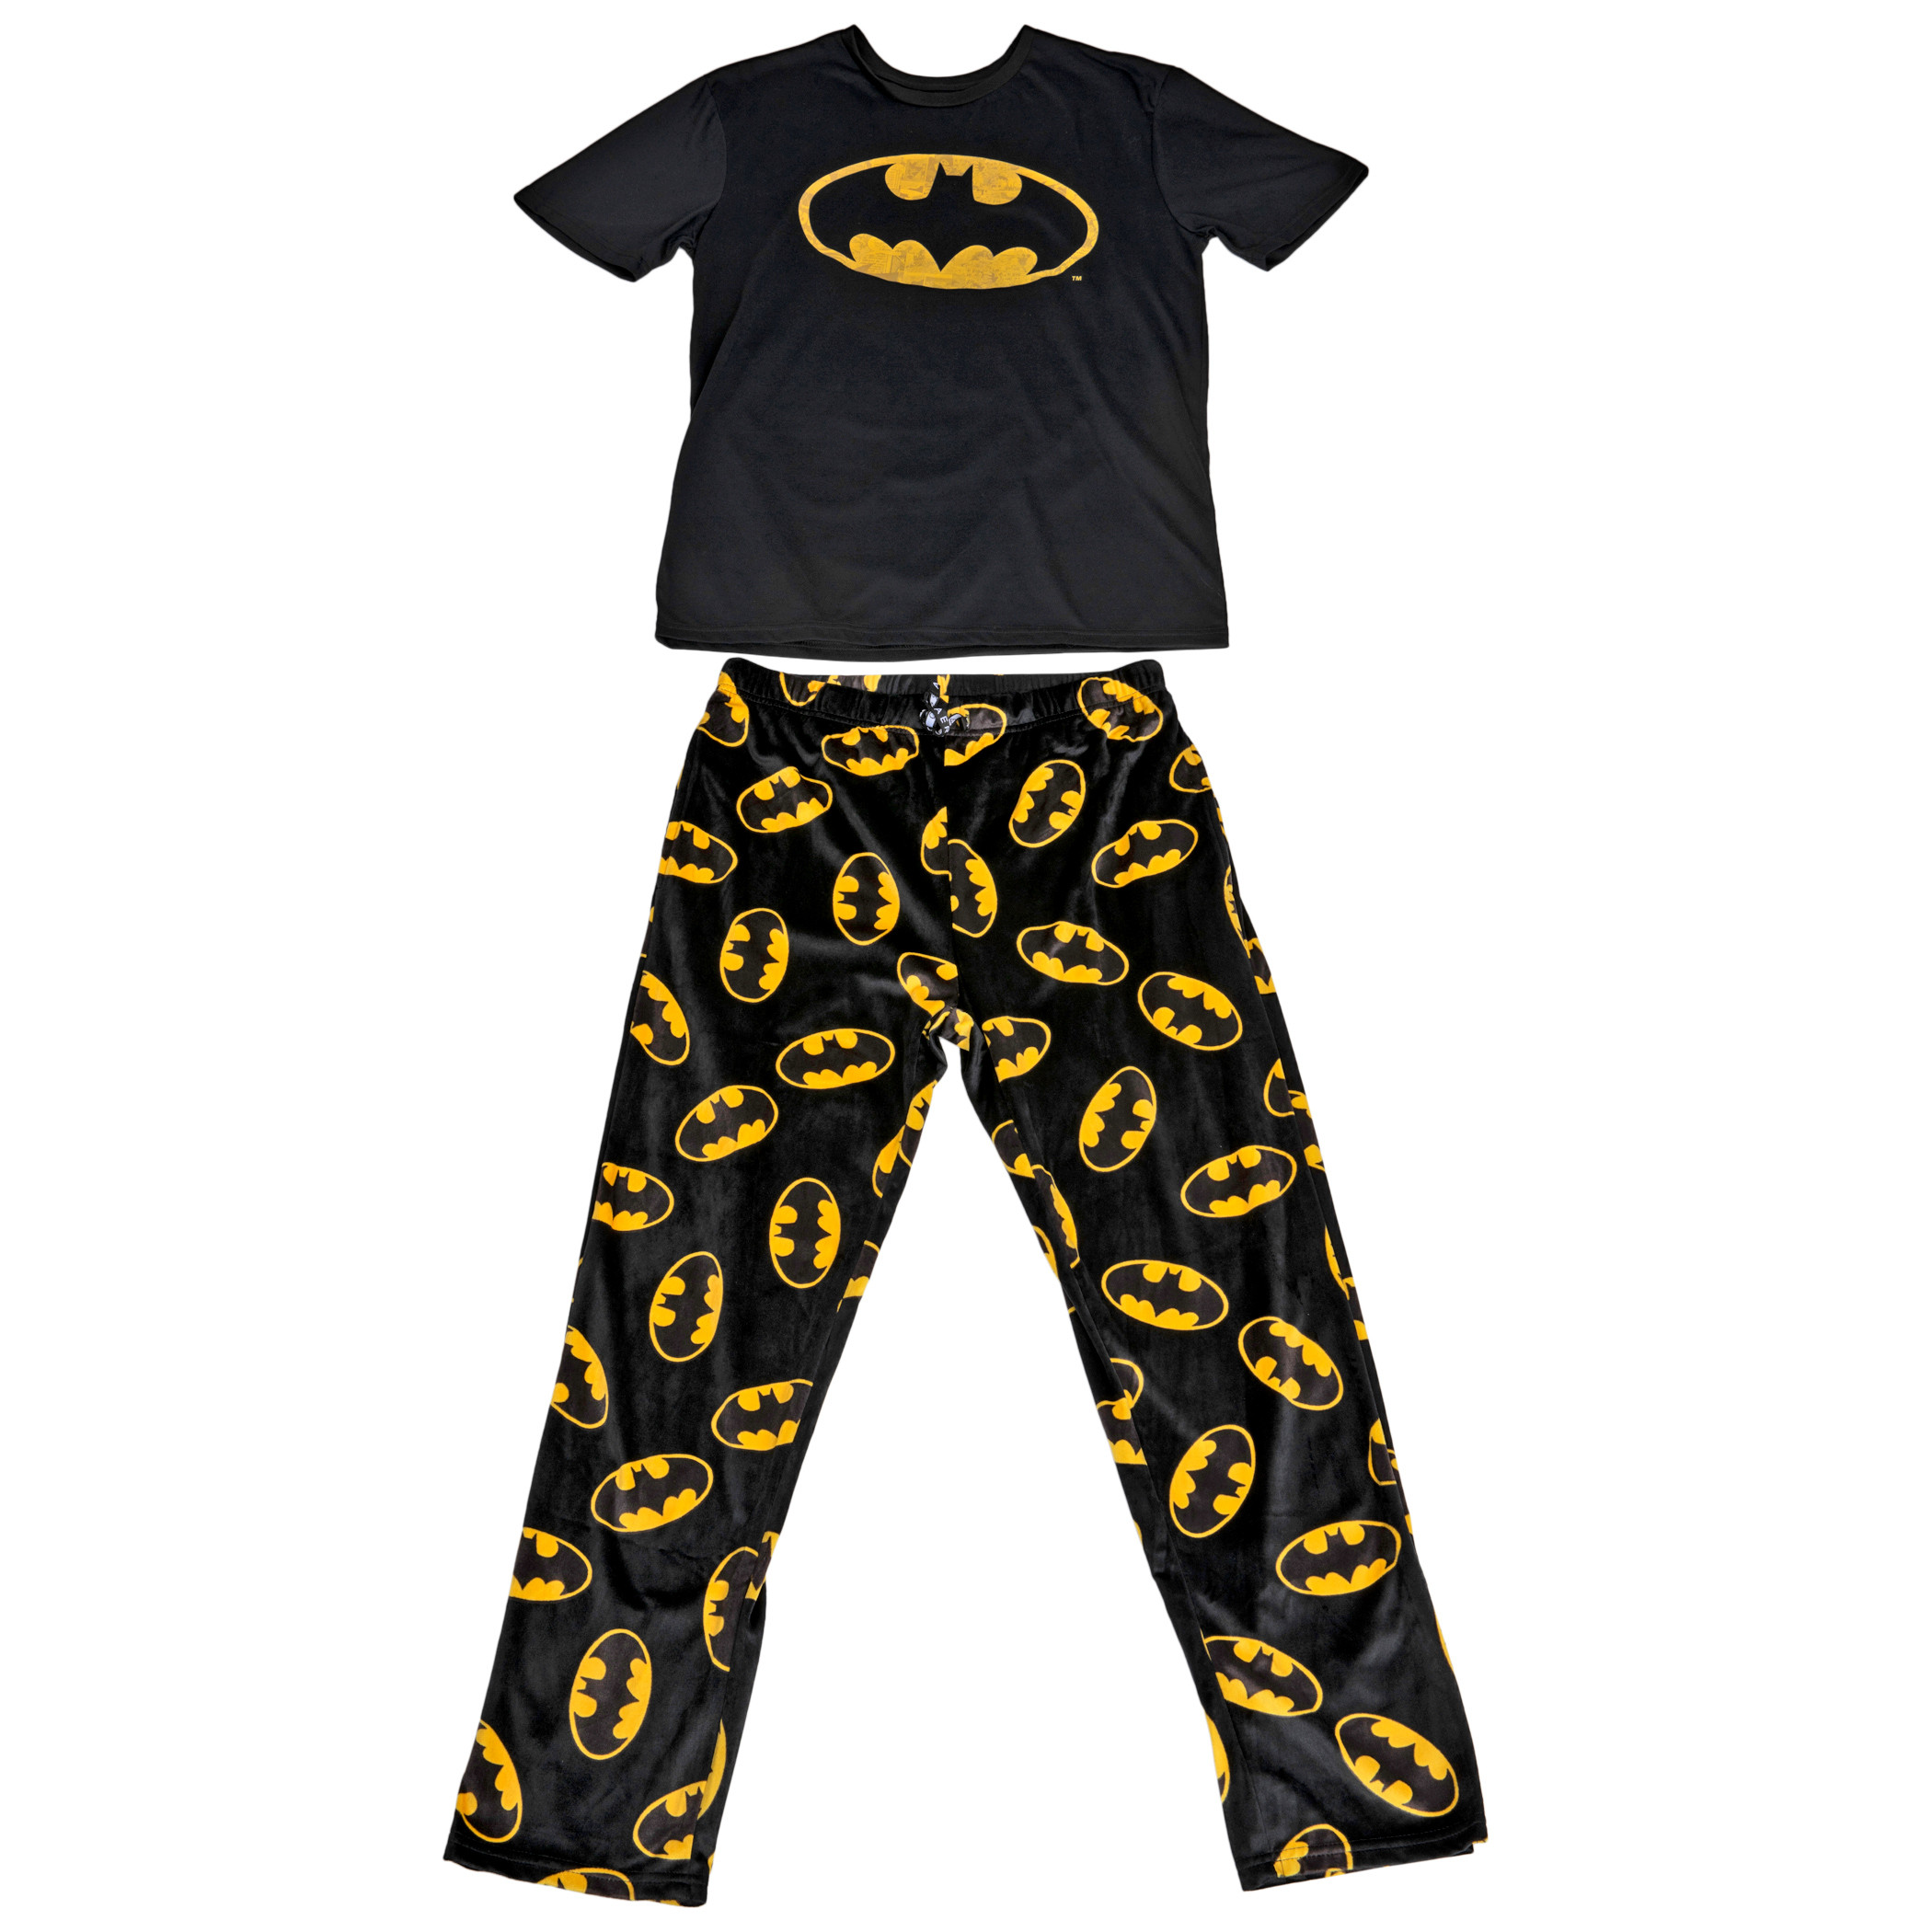 Batman Logo Printed T shirt And Plain Trouser Navy Track Suit Half Sleeves  Tees Double Pocket Trousers Summer Collection Gym Sport Wear For Men